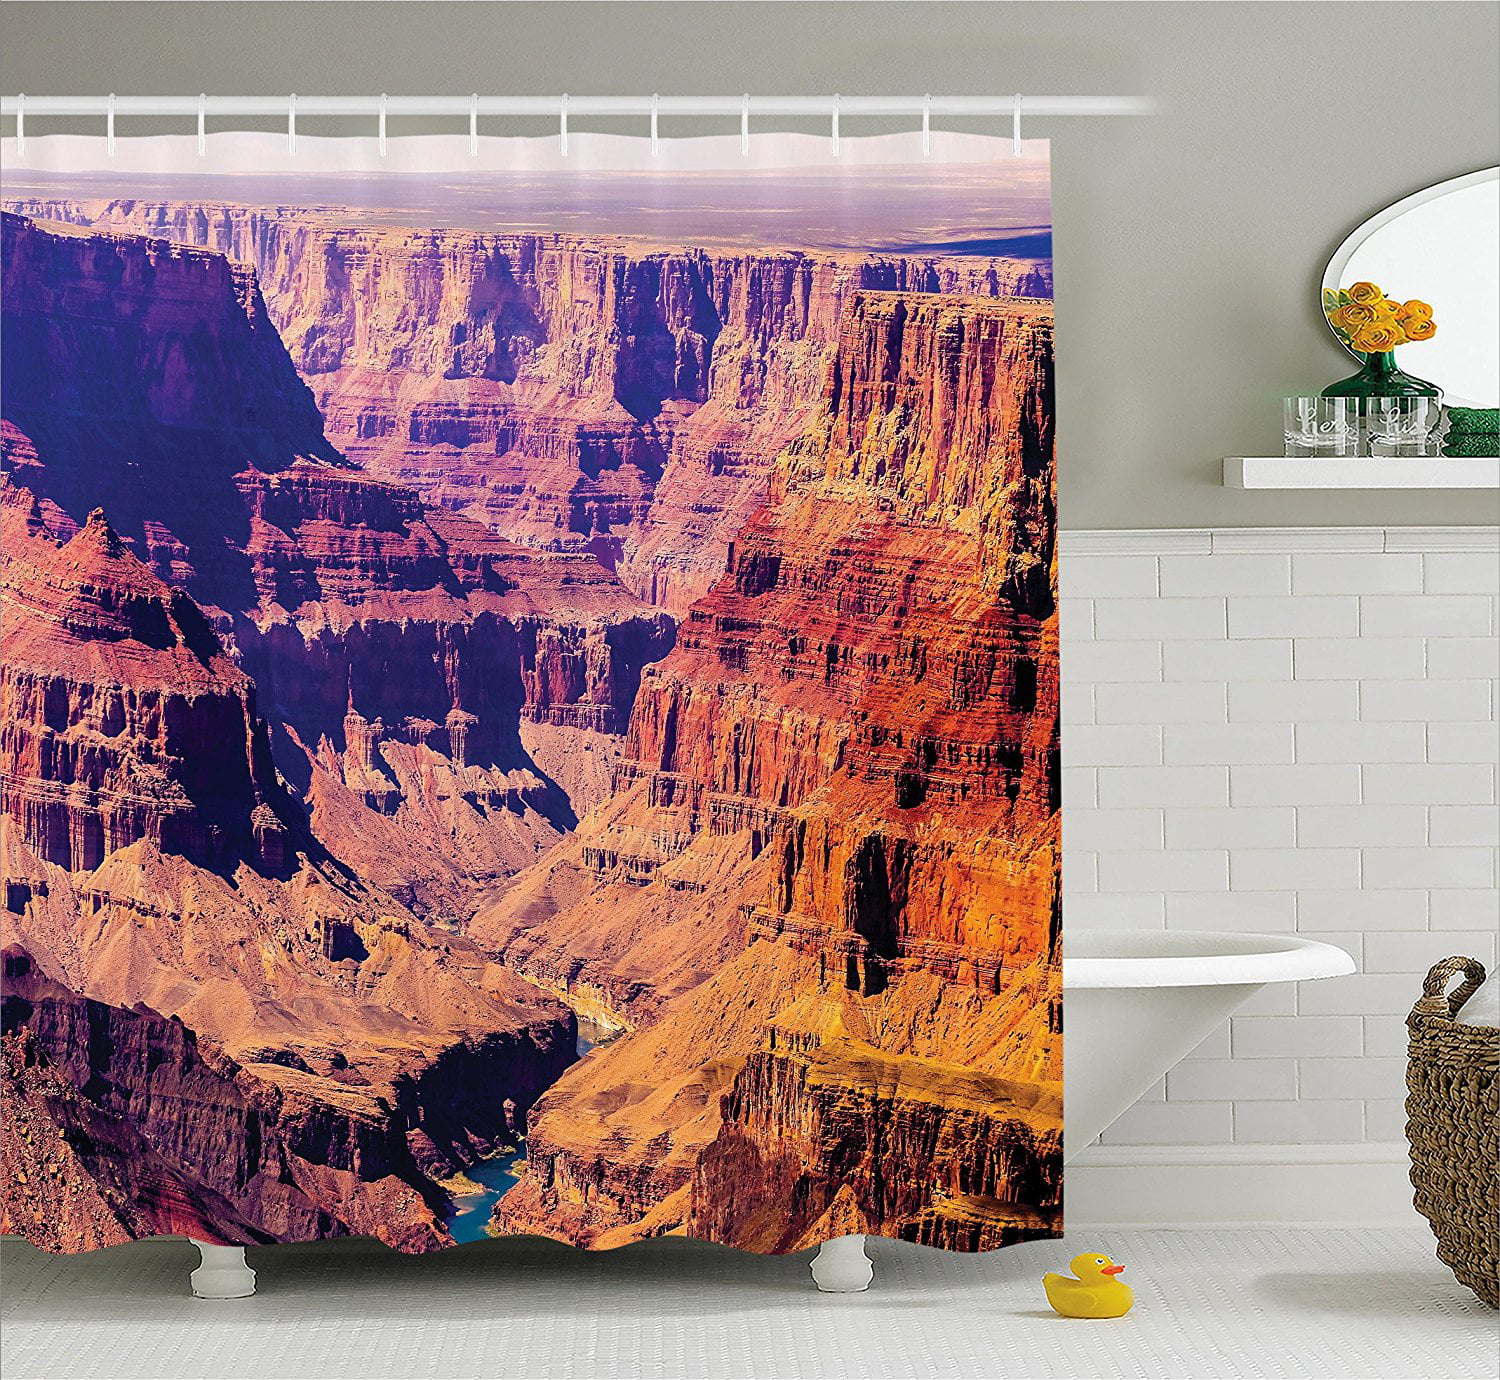 Tribe Native American Painted on Brick Wall Waterproof Fabric Shower Curtain Set 